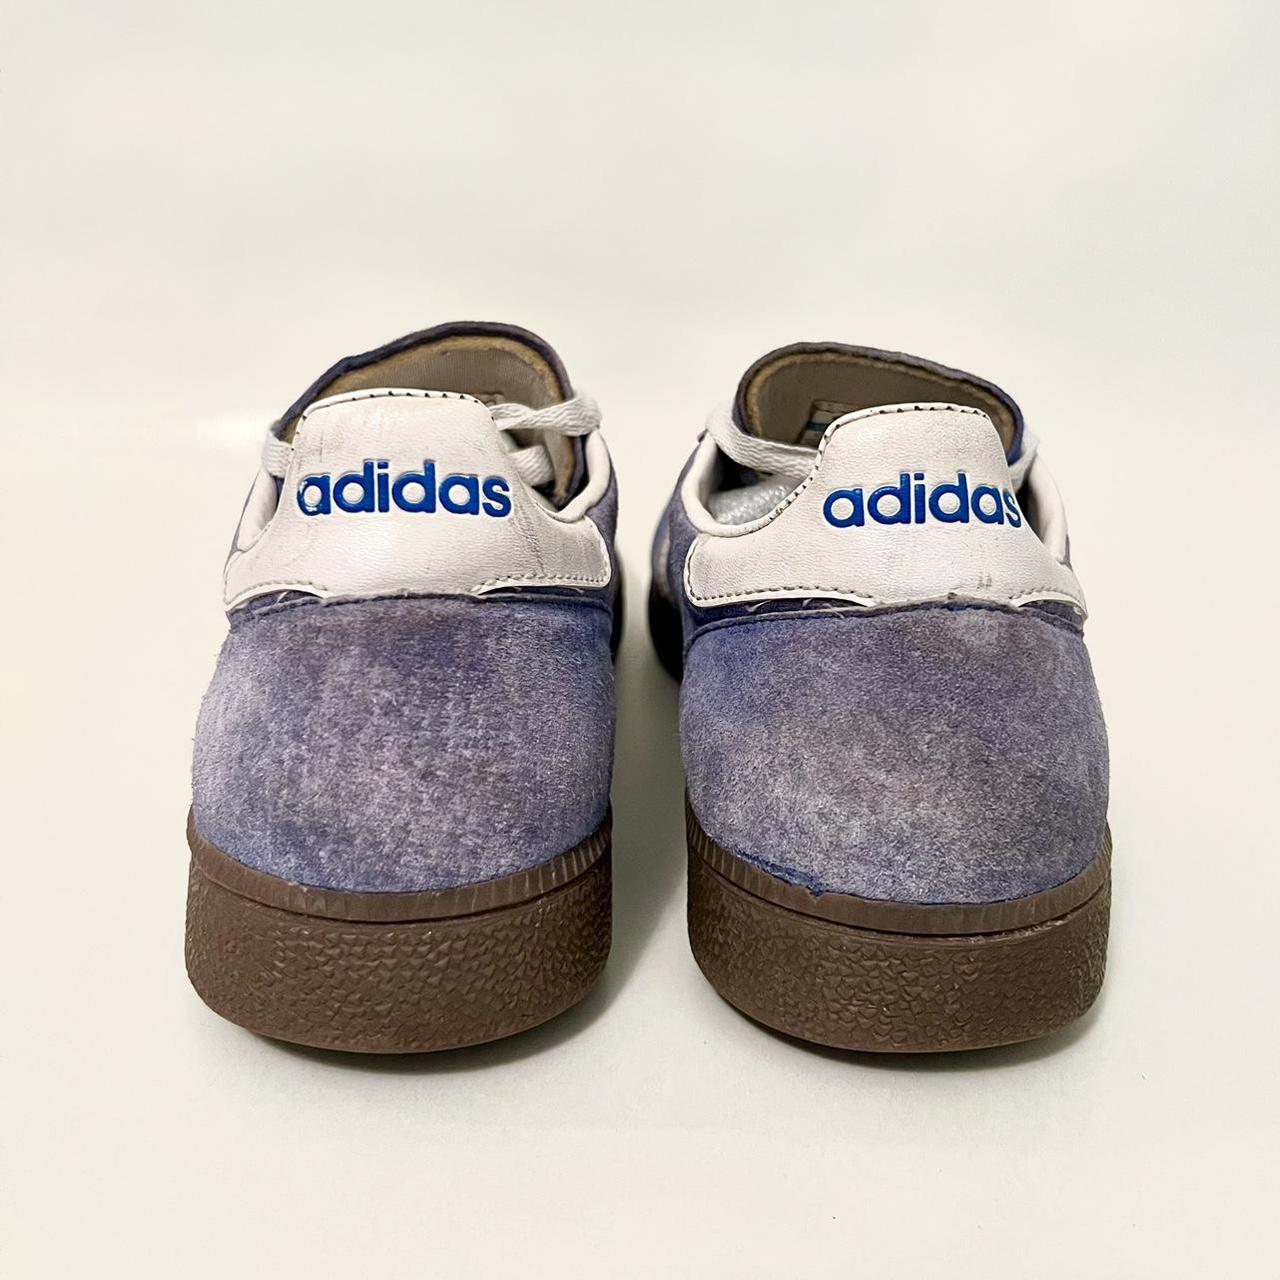 Adidas Men's Blue and White Trainers | Depop